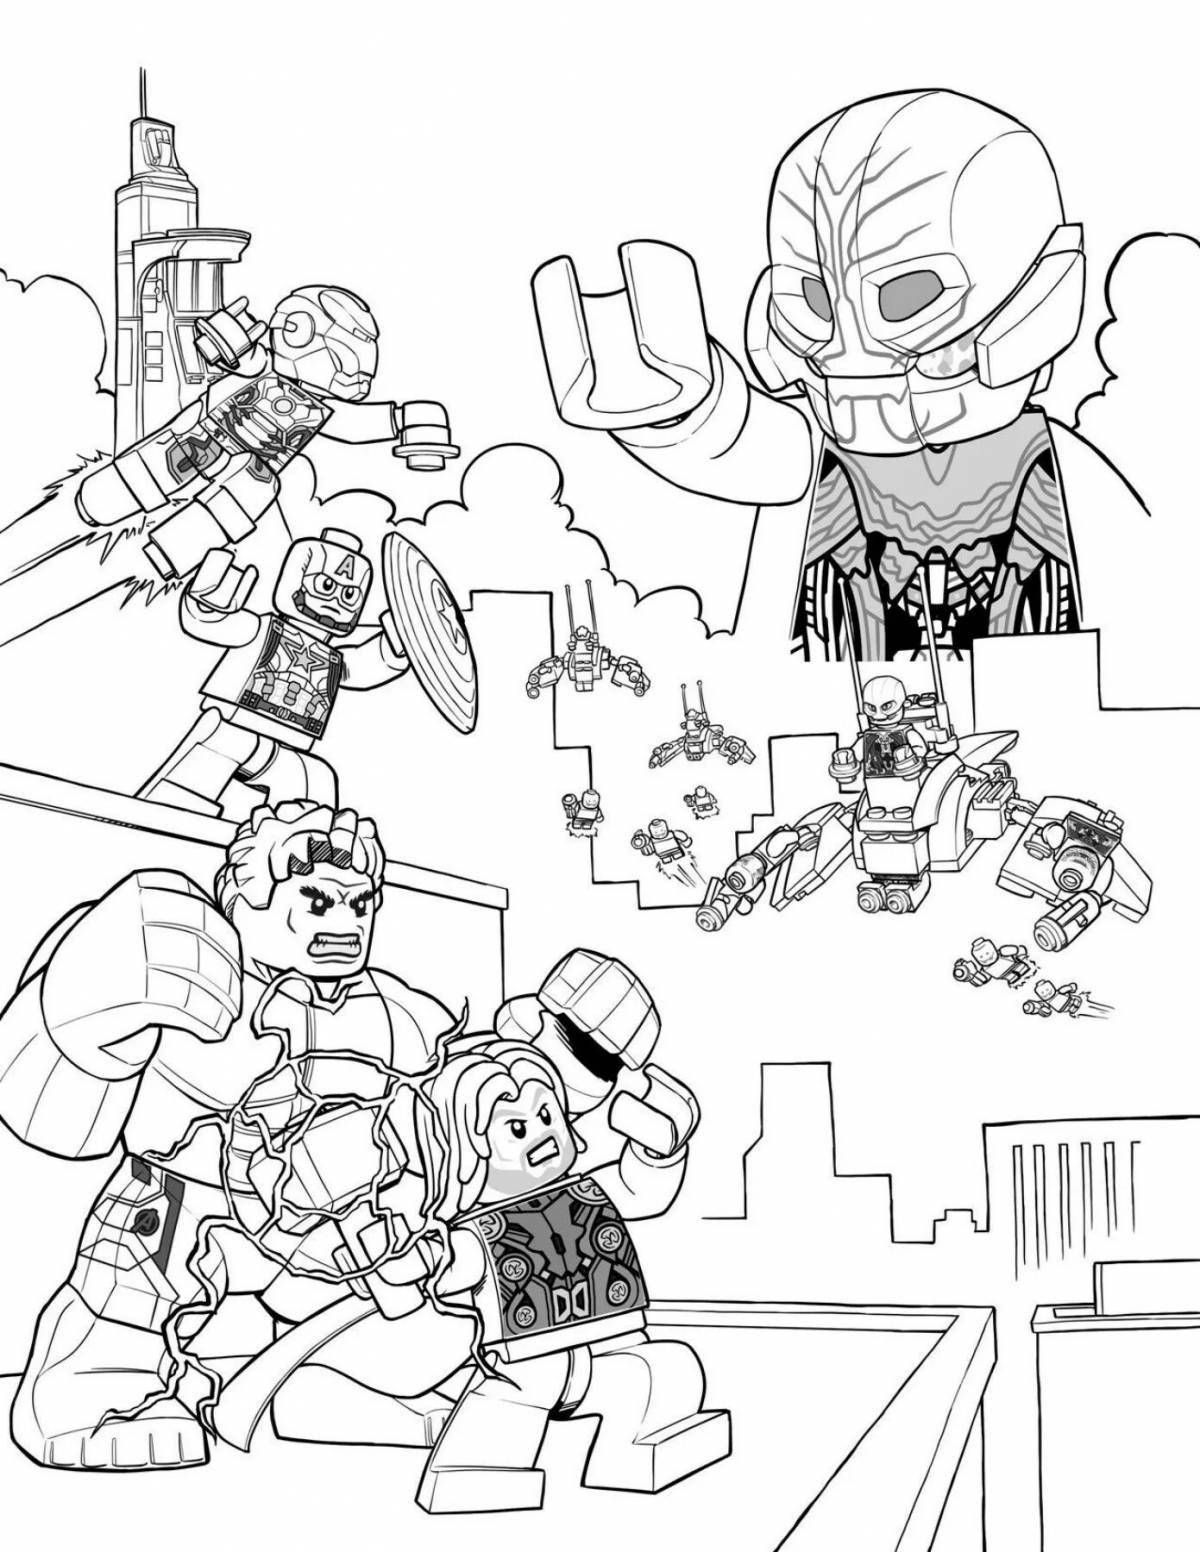 Playful lego heroes coloring page